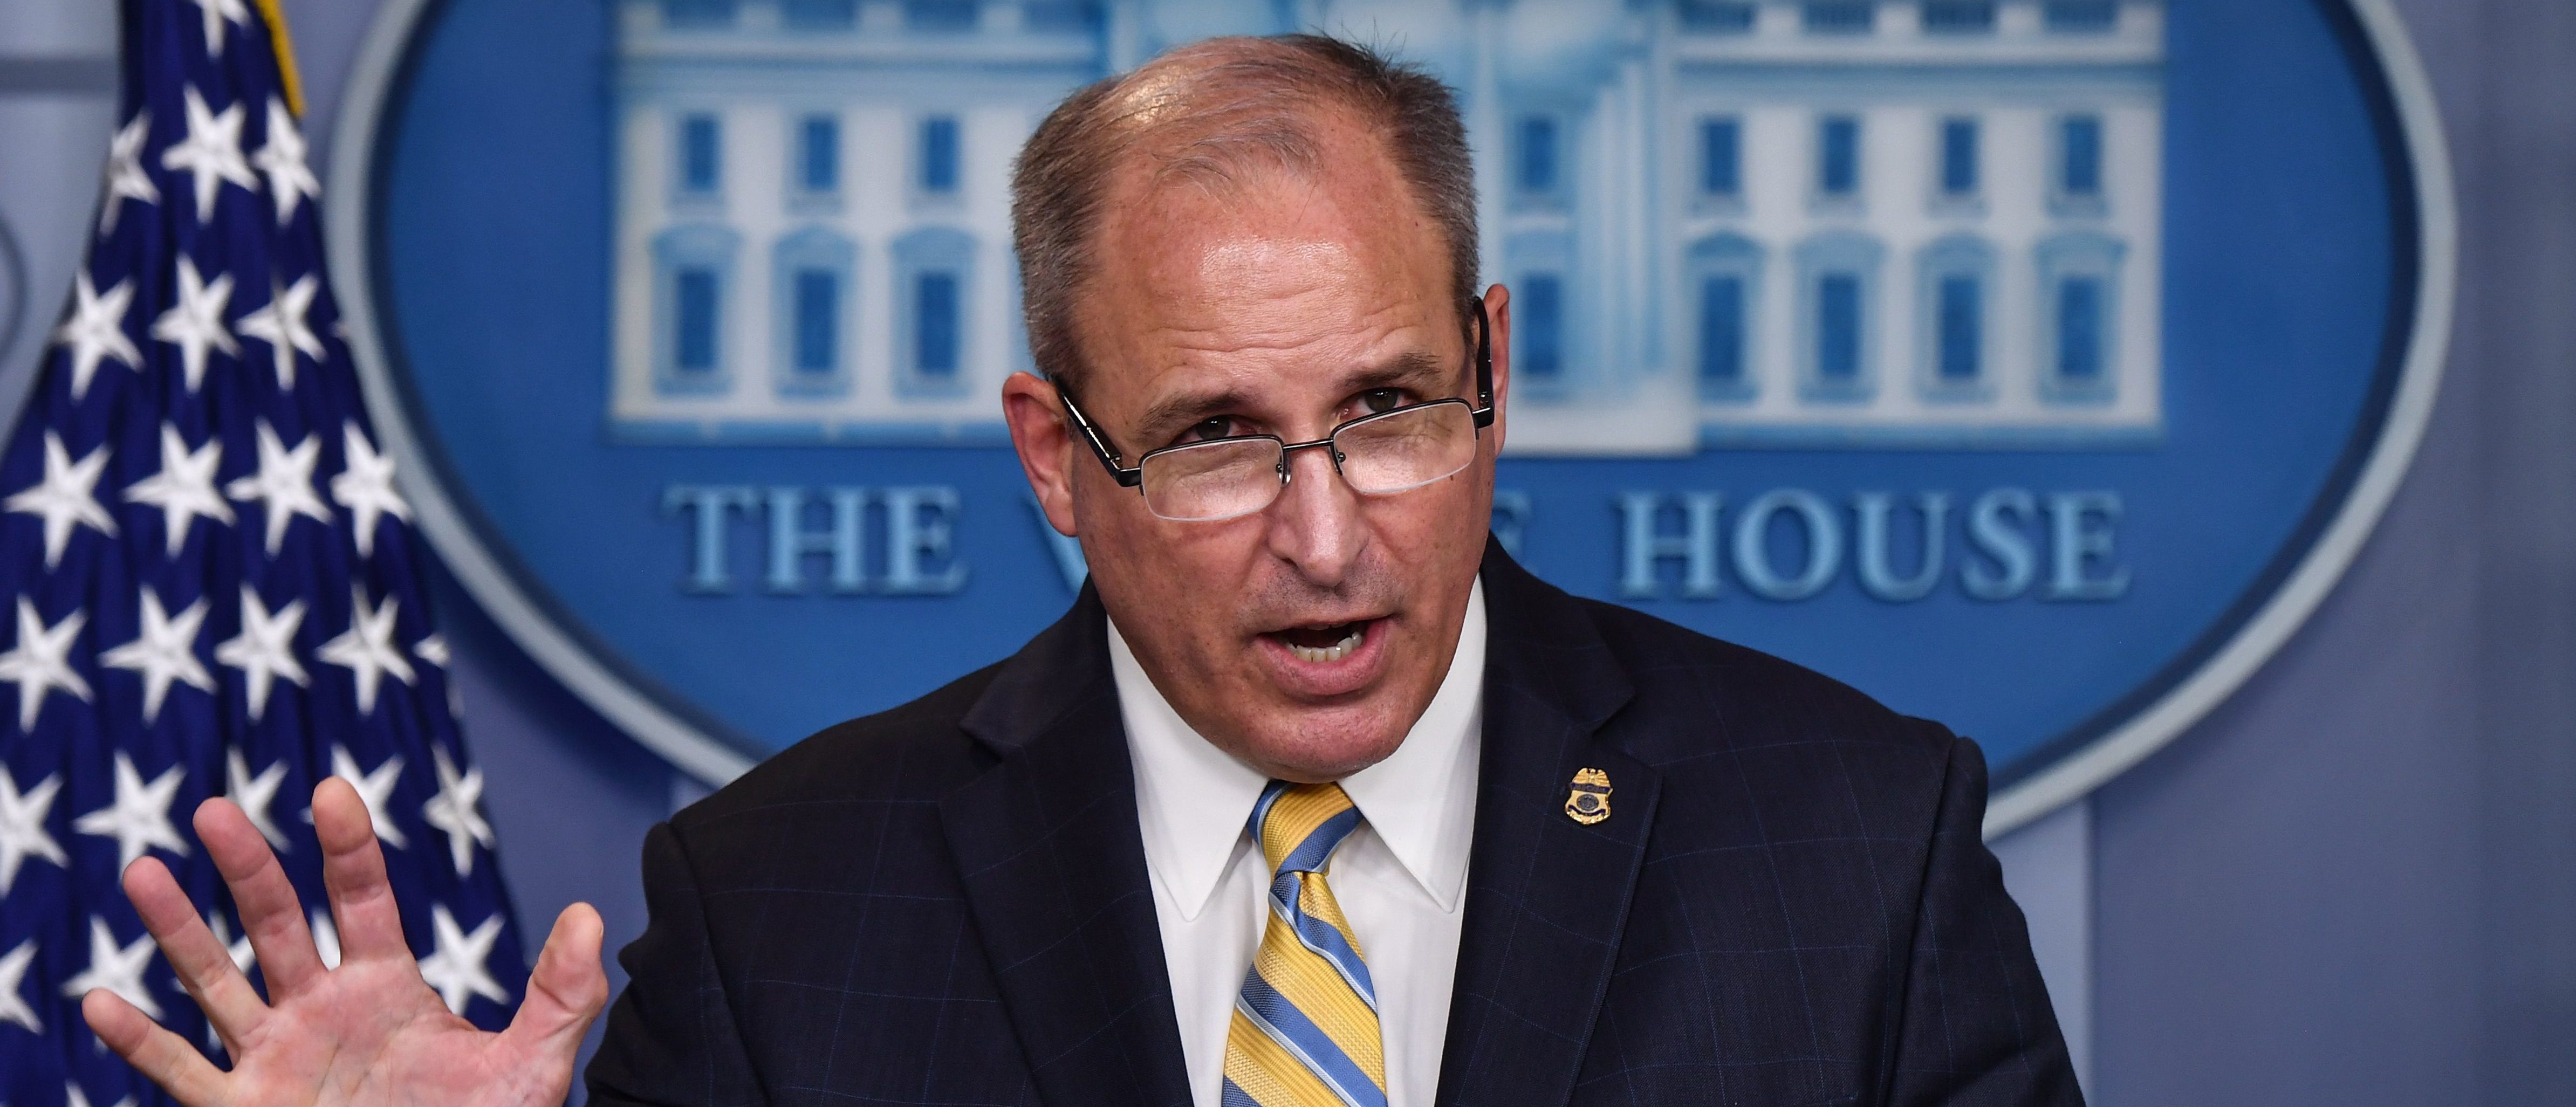 U.S. Acting Commissioner of Customs and Border Protection Mark Morgan speaks during a briefing at the White House in Washington, D.C., on Sept. 9, 2019. (Photo: NICHOLAS KAMM/AFP/Getty Images)